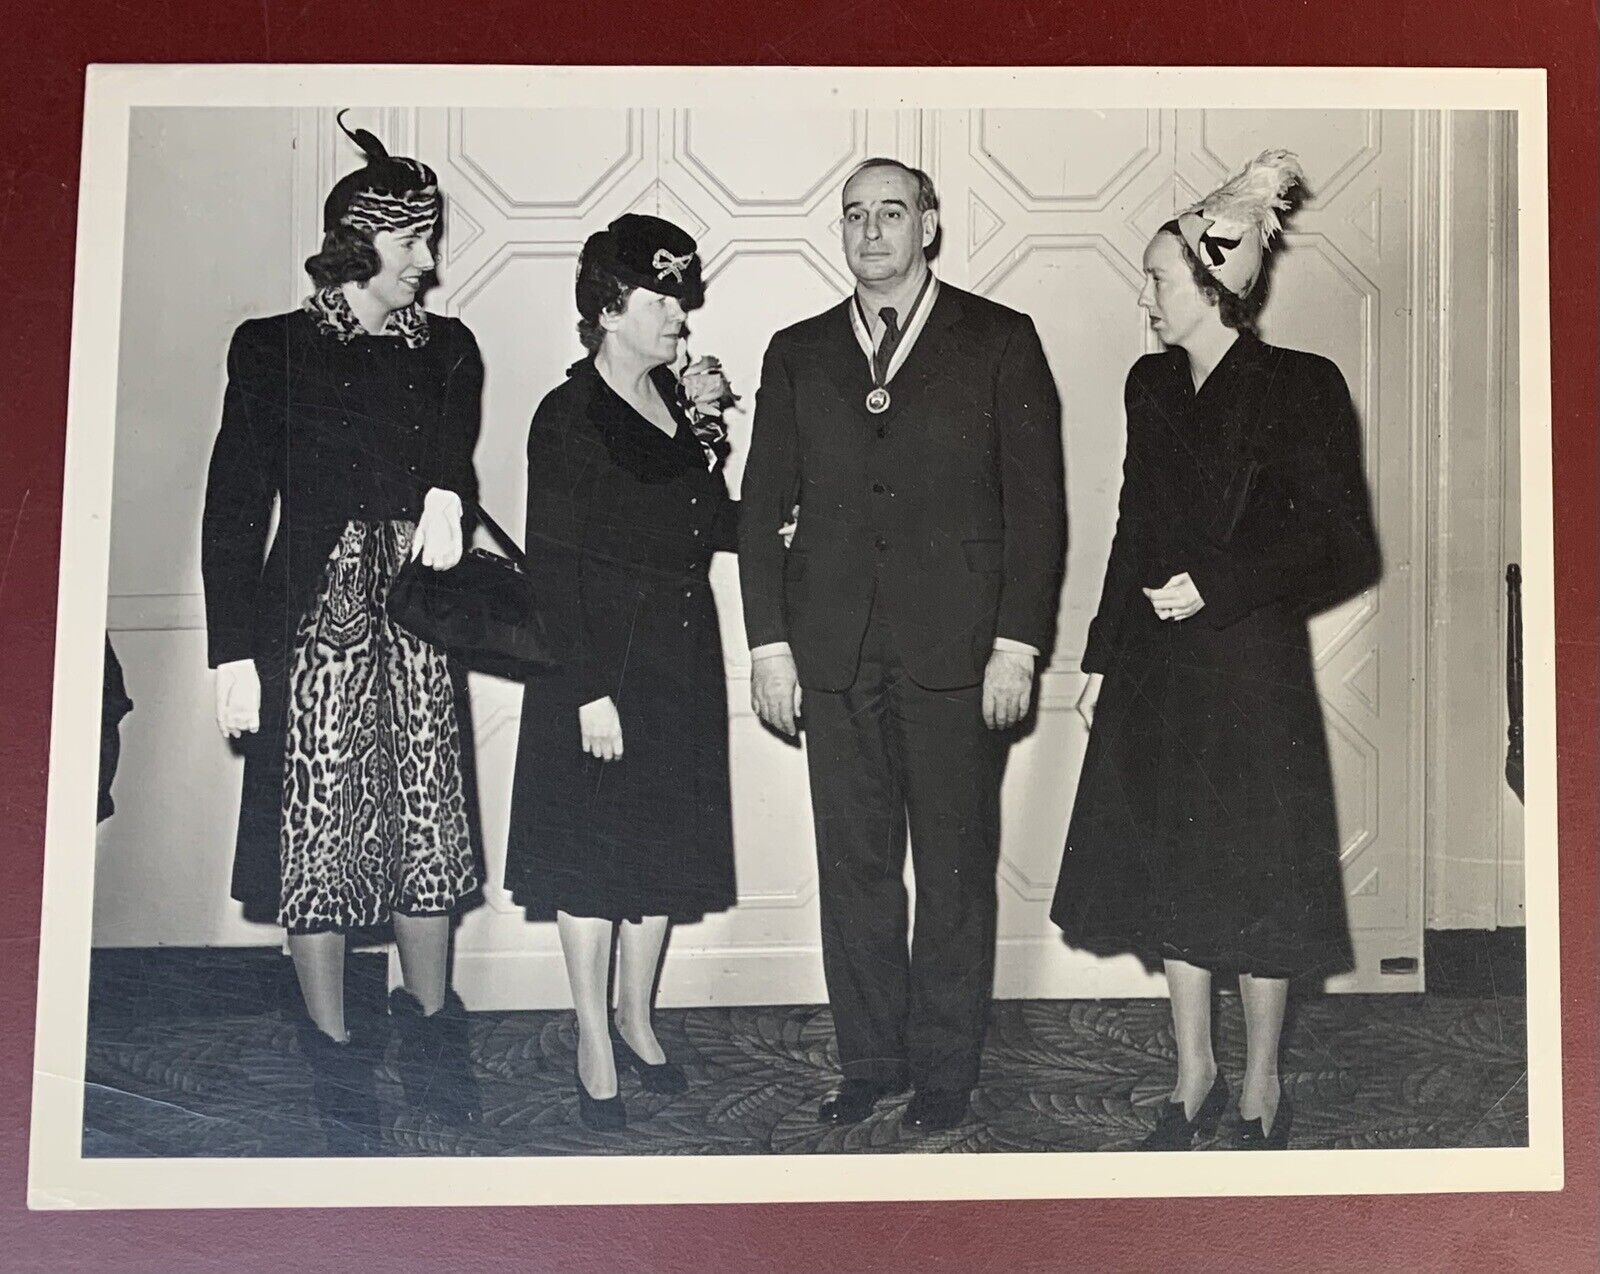 Robert Moses and Family, 1943, at Rotary Club of New York, 8